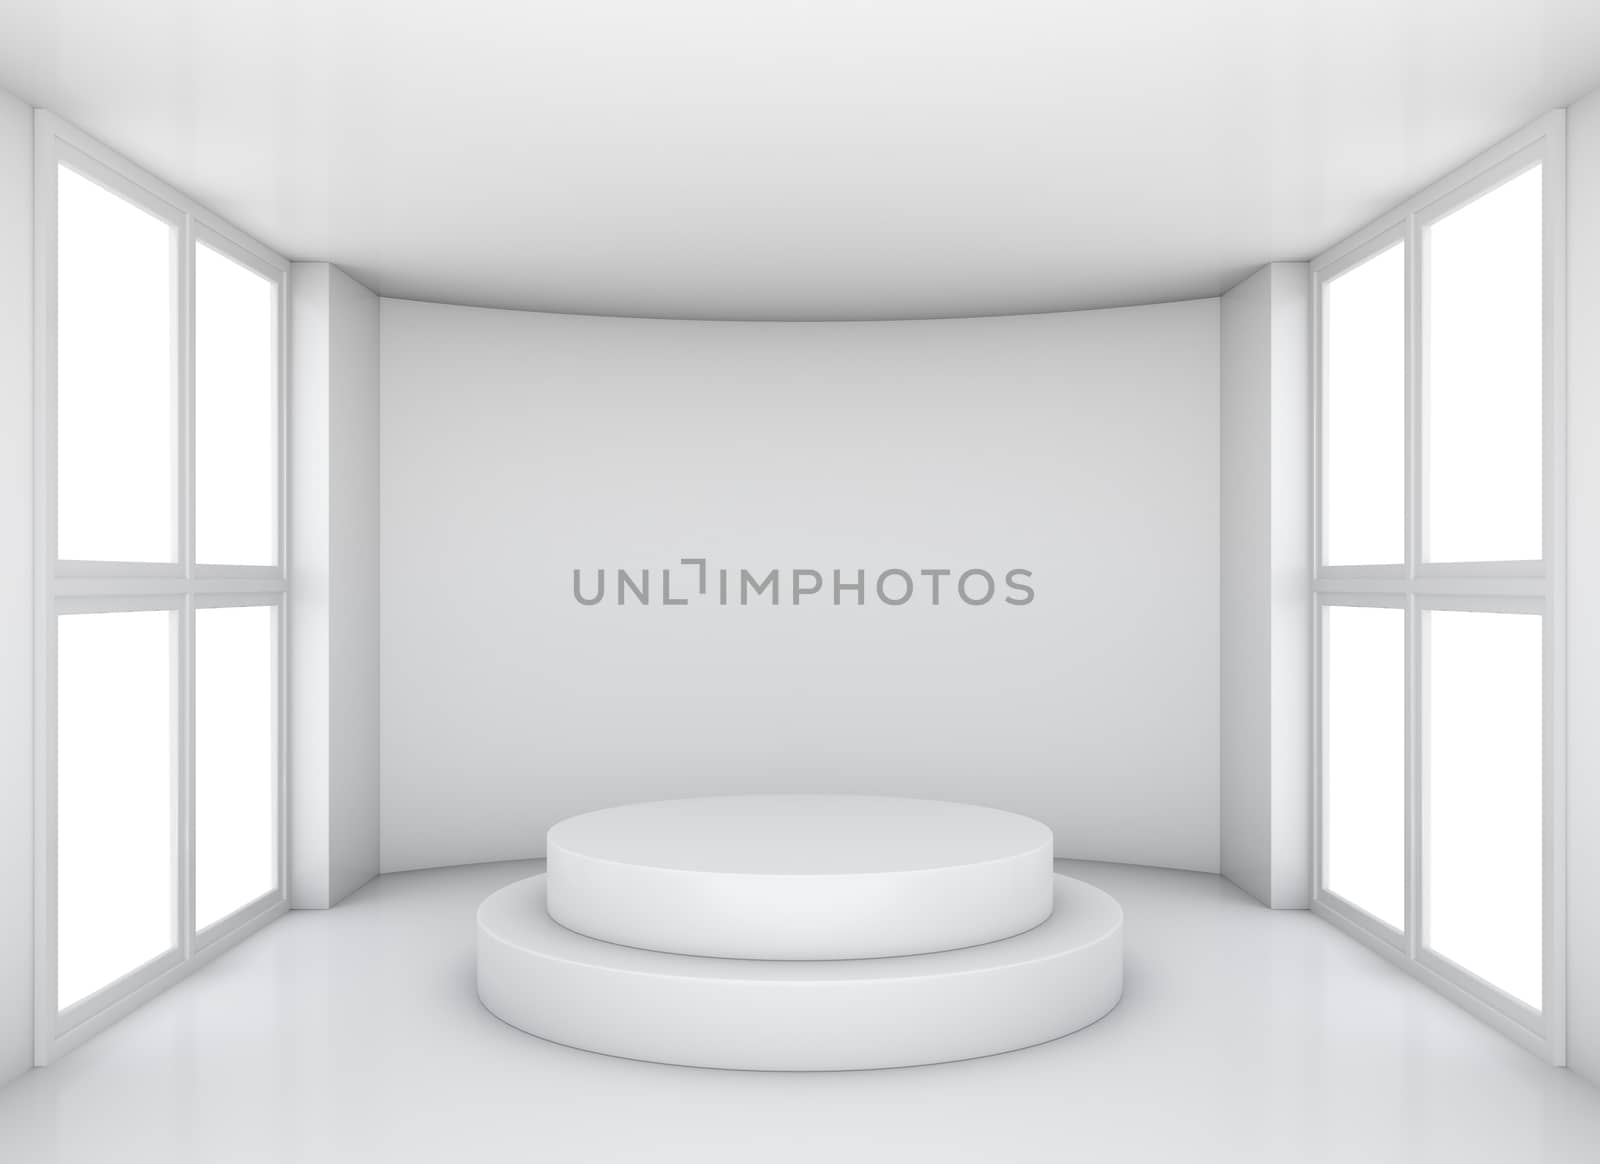 New interior with round concrete and large windows. 3D illustration